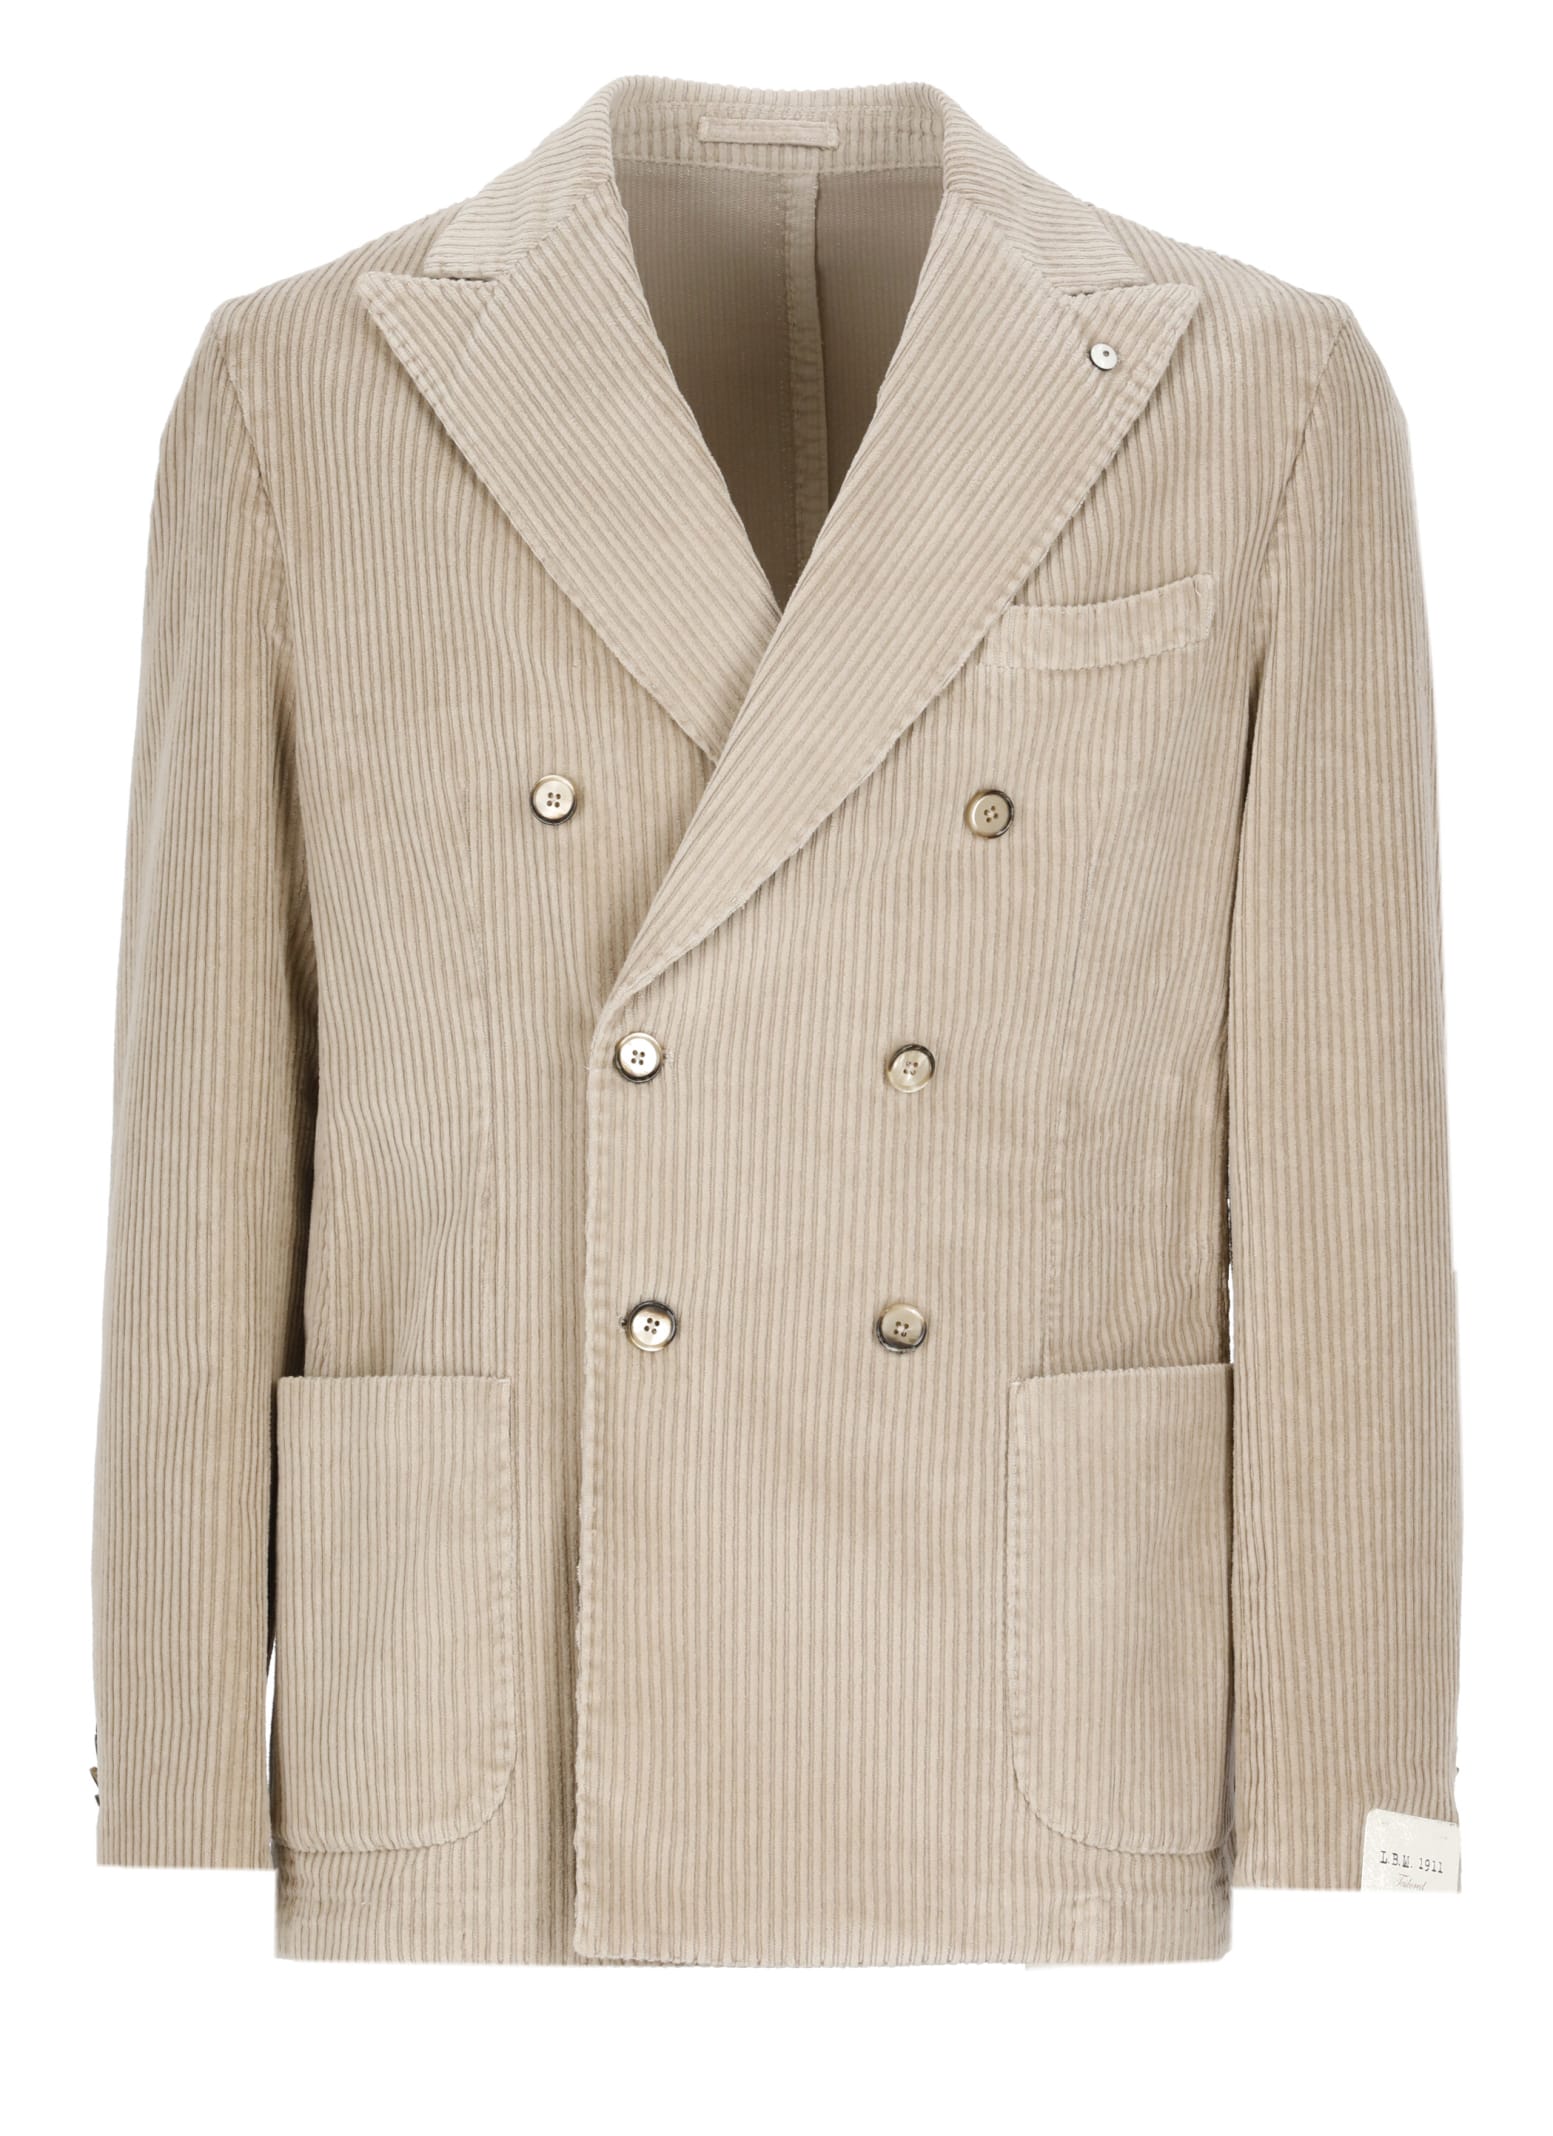 L.B.M. 1911 Cotton Double-breasted Jacket